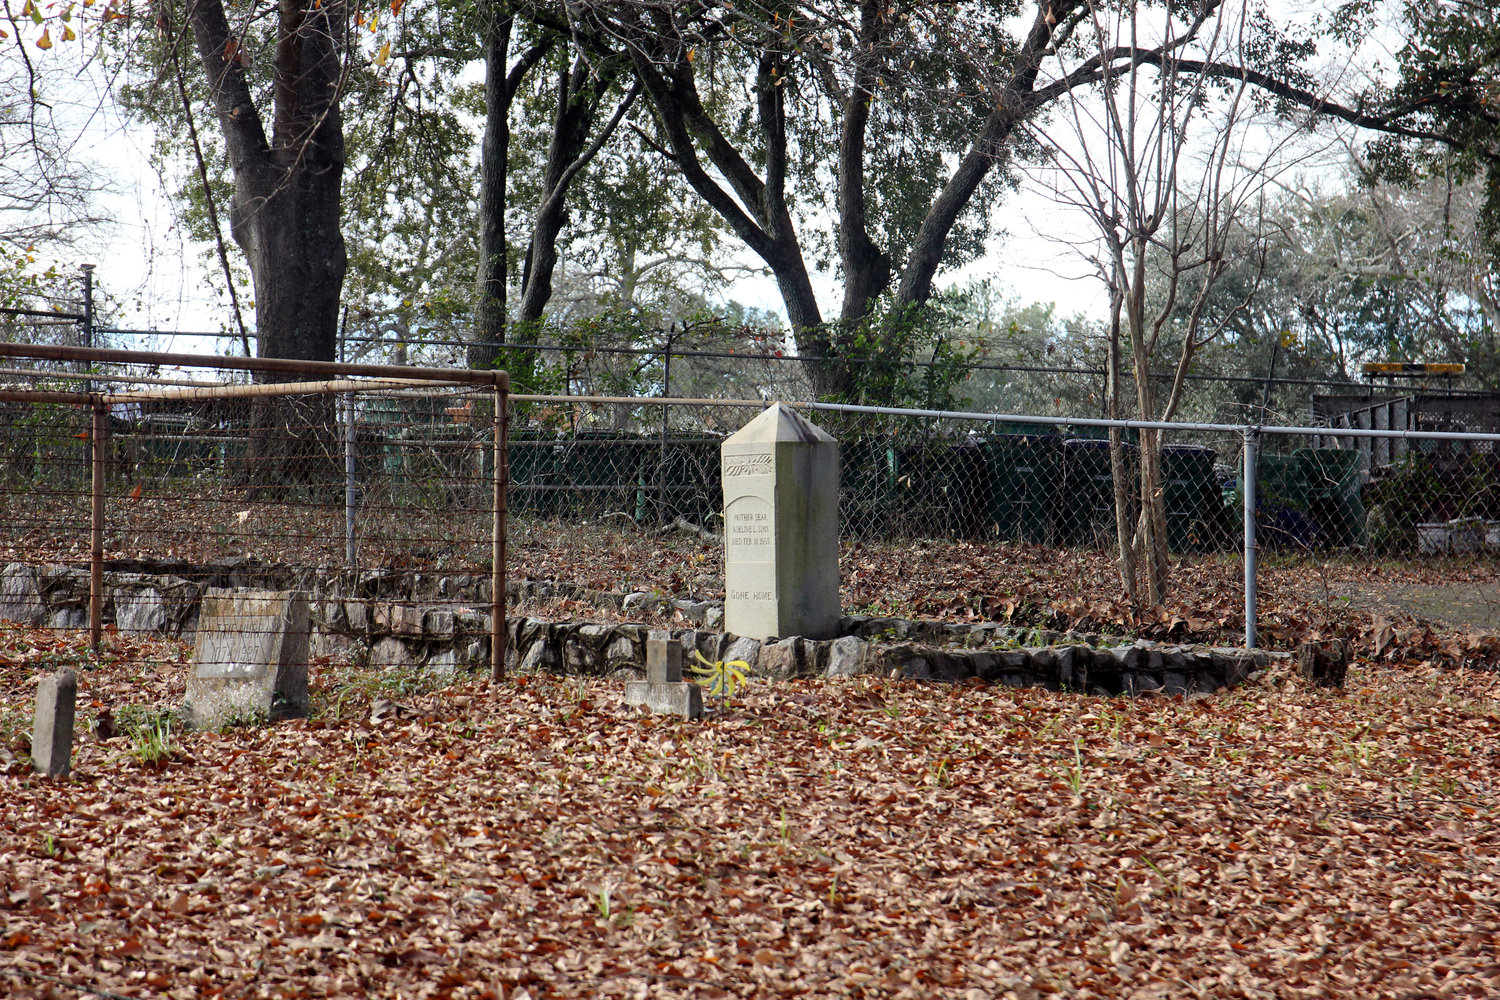 The cemetery for the since-closed Saint Ann’s Episcopal Church is located next to what is today the Cayce Historical Museum.